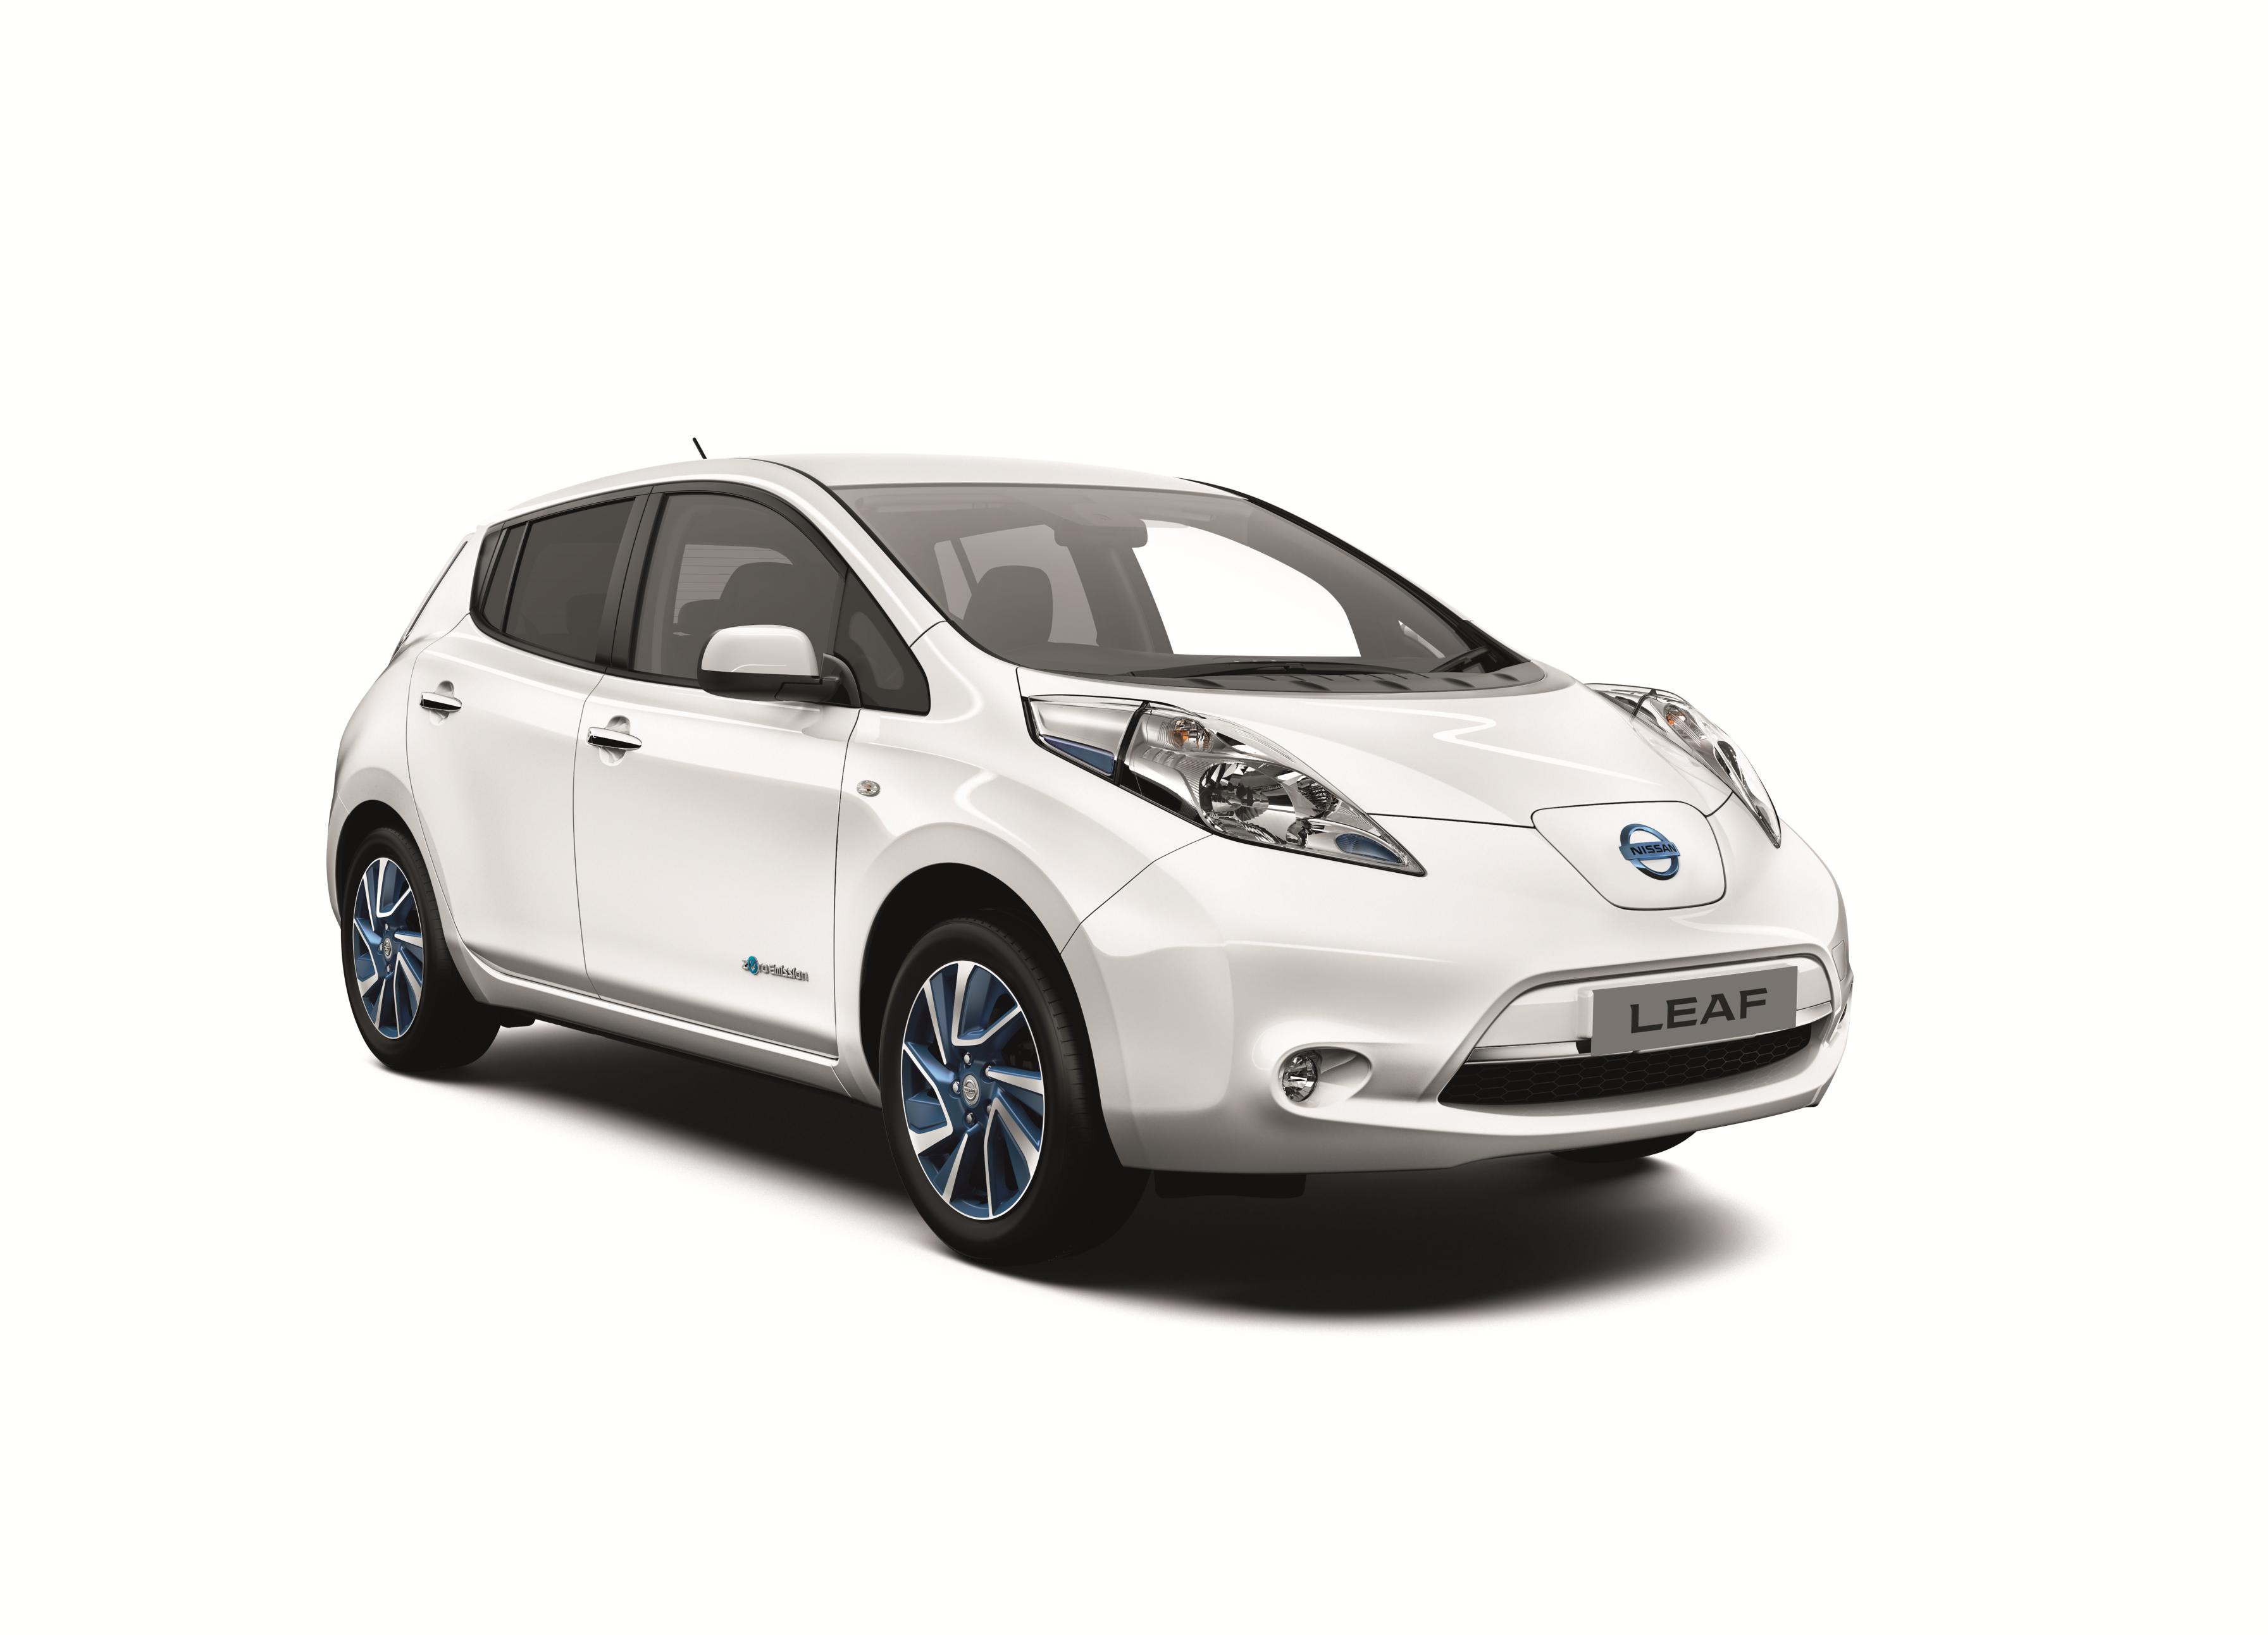 2015 Nissan Leaf Now Available in Acenta+ Grade in the UK - autoevolution